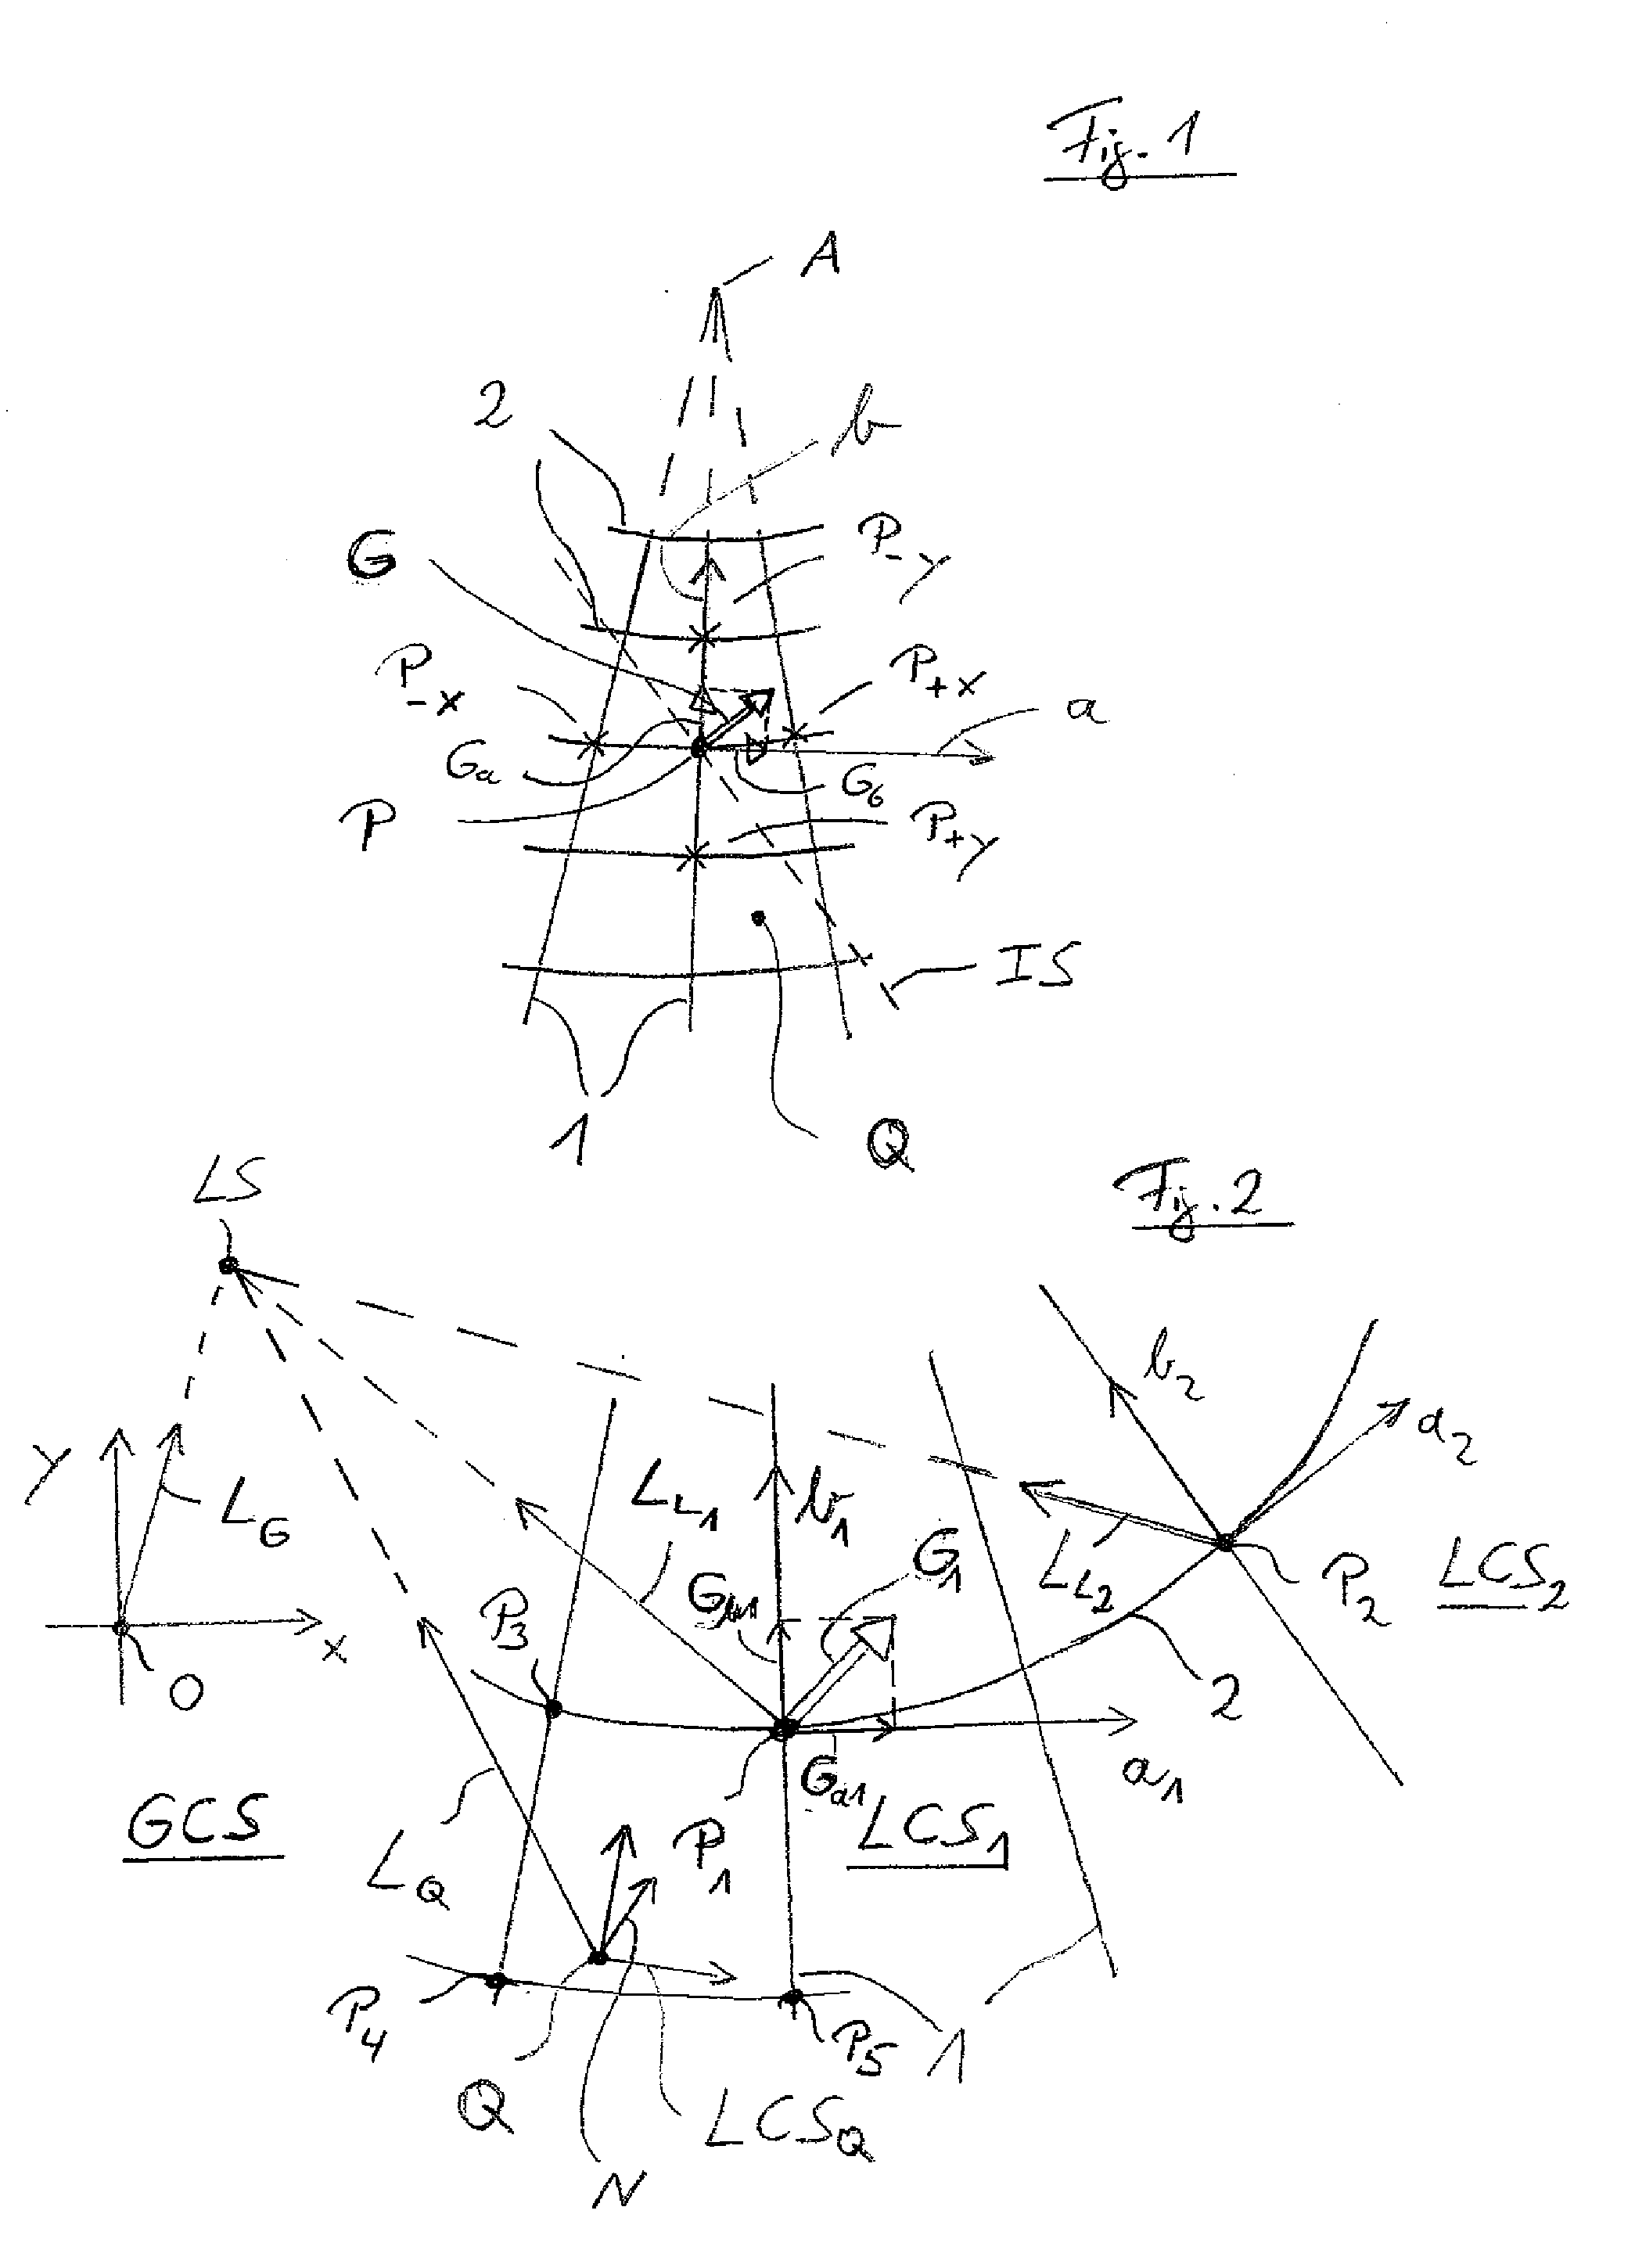 Method and device for visualizing surface-like structures in volumetric data sets